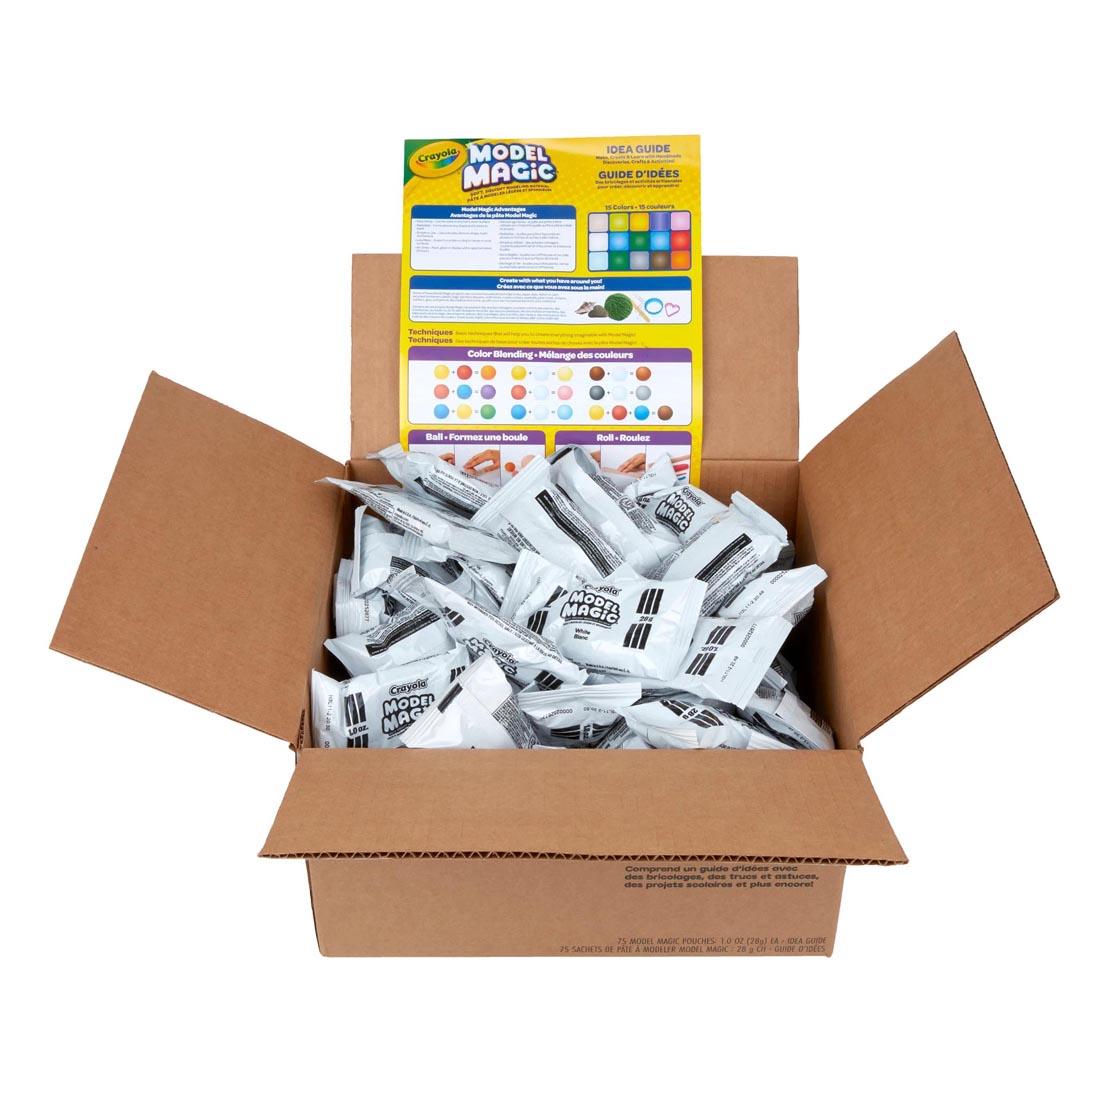 Open box with Crayola White Model Magic Packages inside Plus a Book of Classroom Ideas